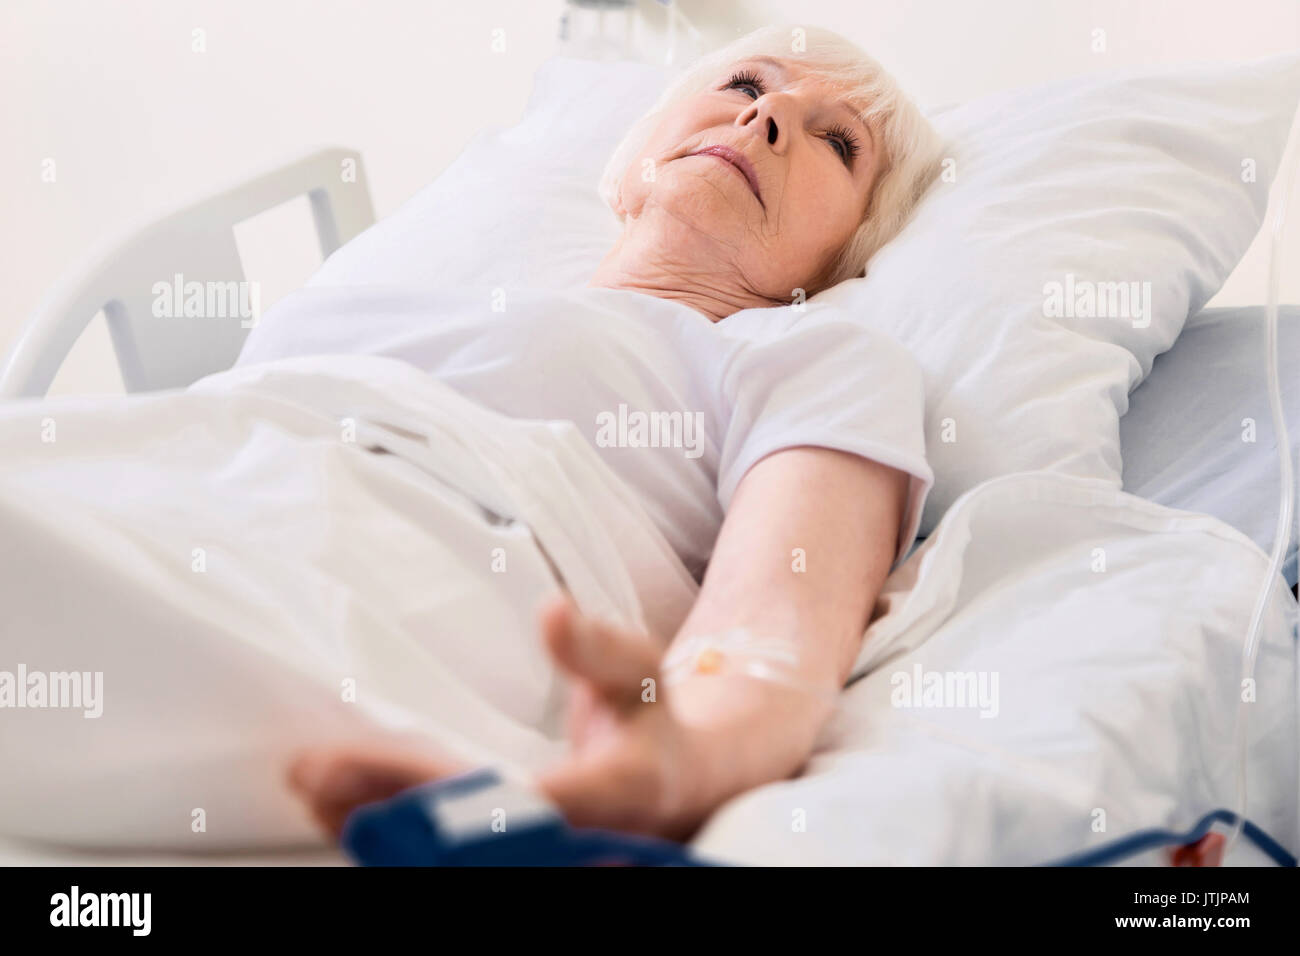 Feeble old lady having her pulse measured Stock Photo